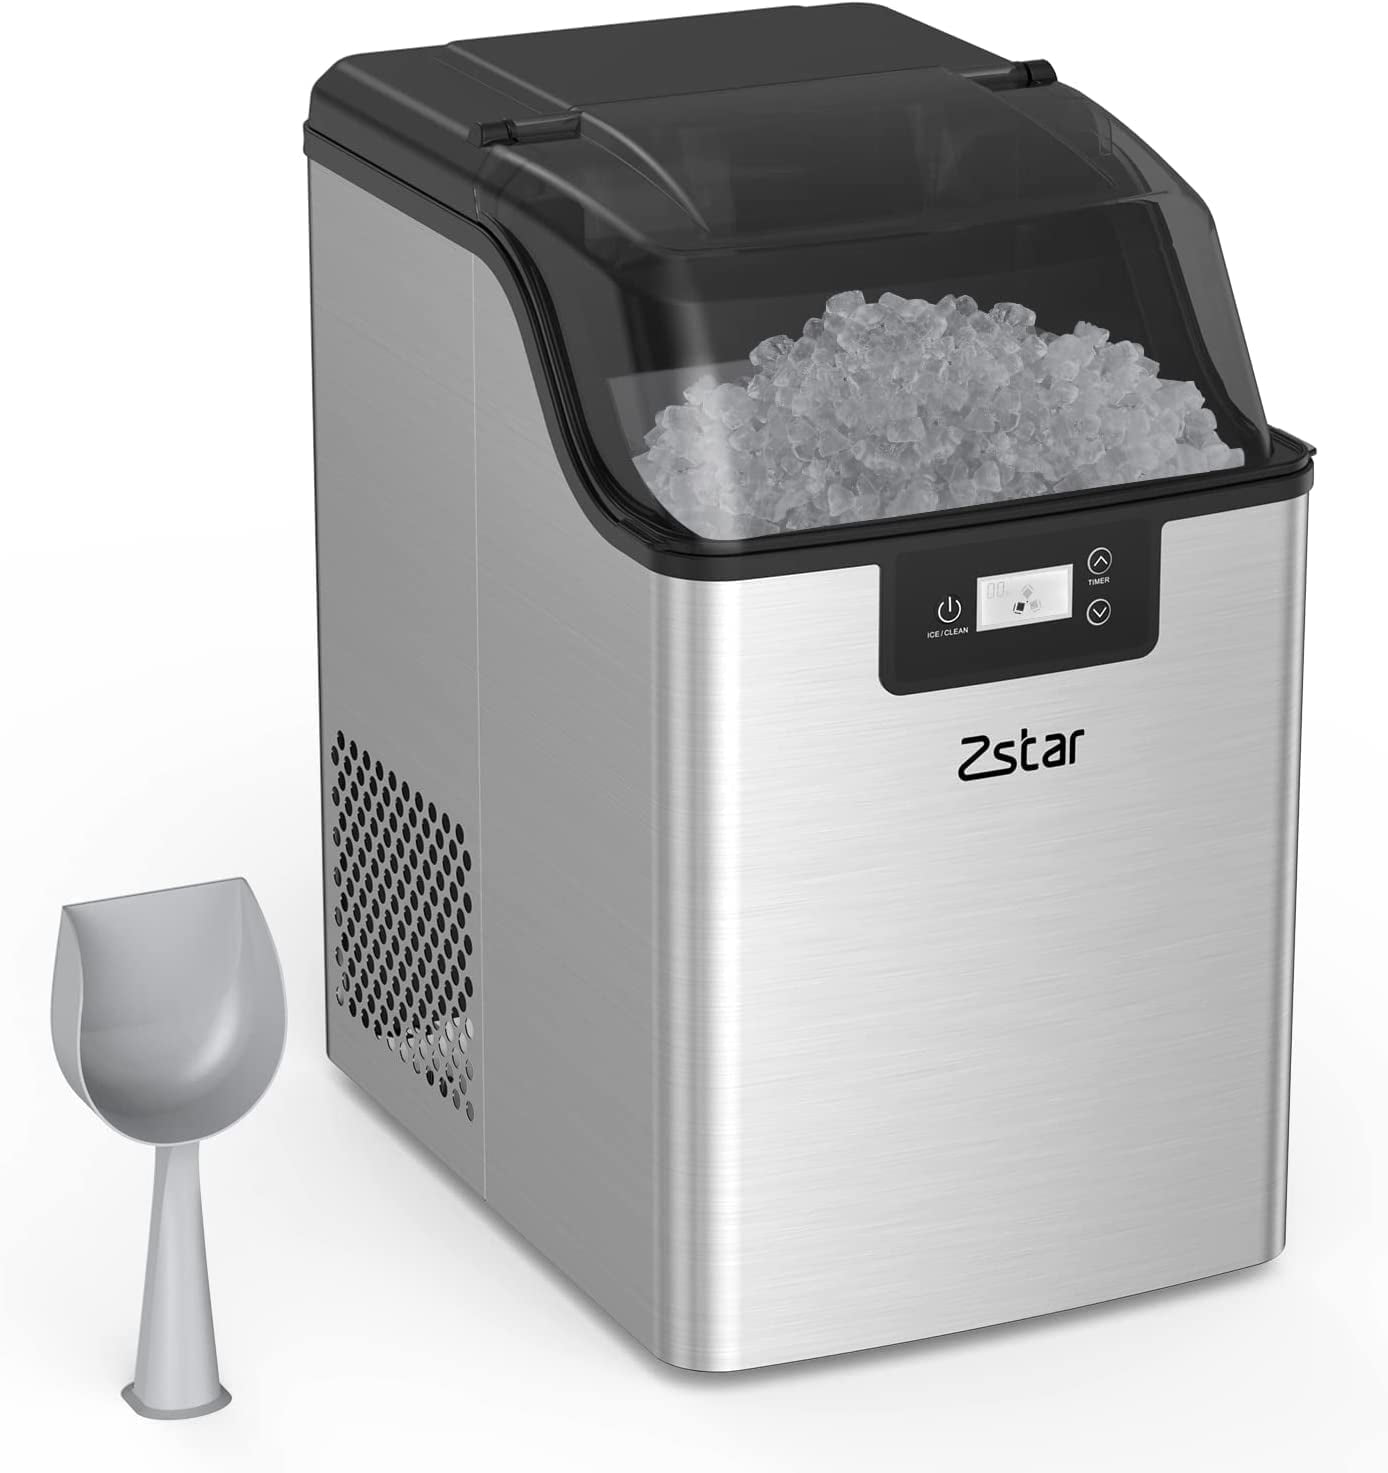 Nugget Ice Maker, Stainless Steel Countertop Ice Machine with 44Lbs/24H  Output, Crunchy Sonic Ice Maker Machine, Self-Cleaning Portable Ice Maker  with